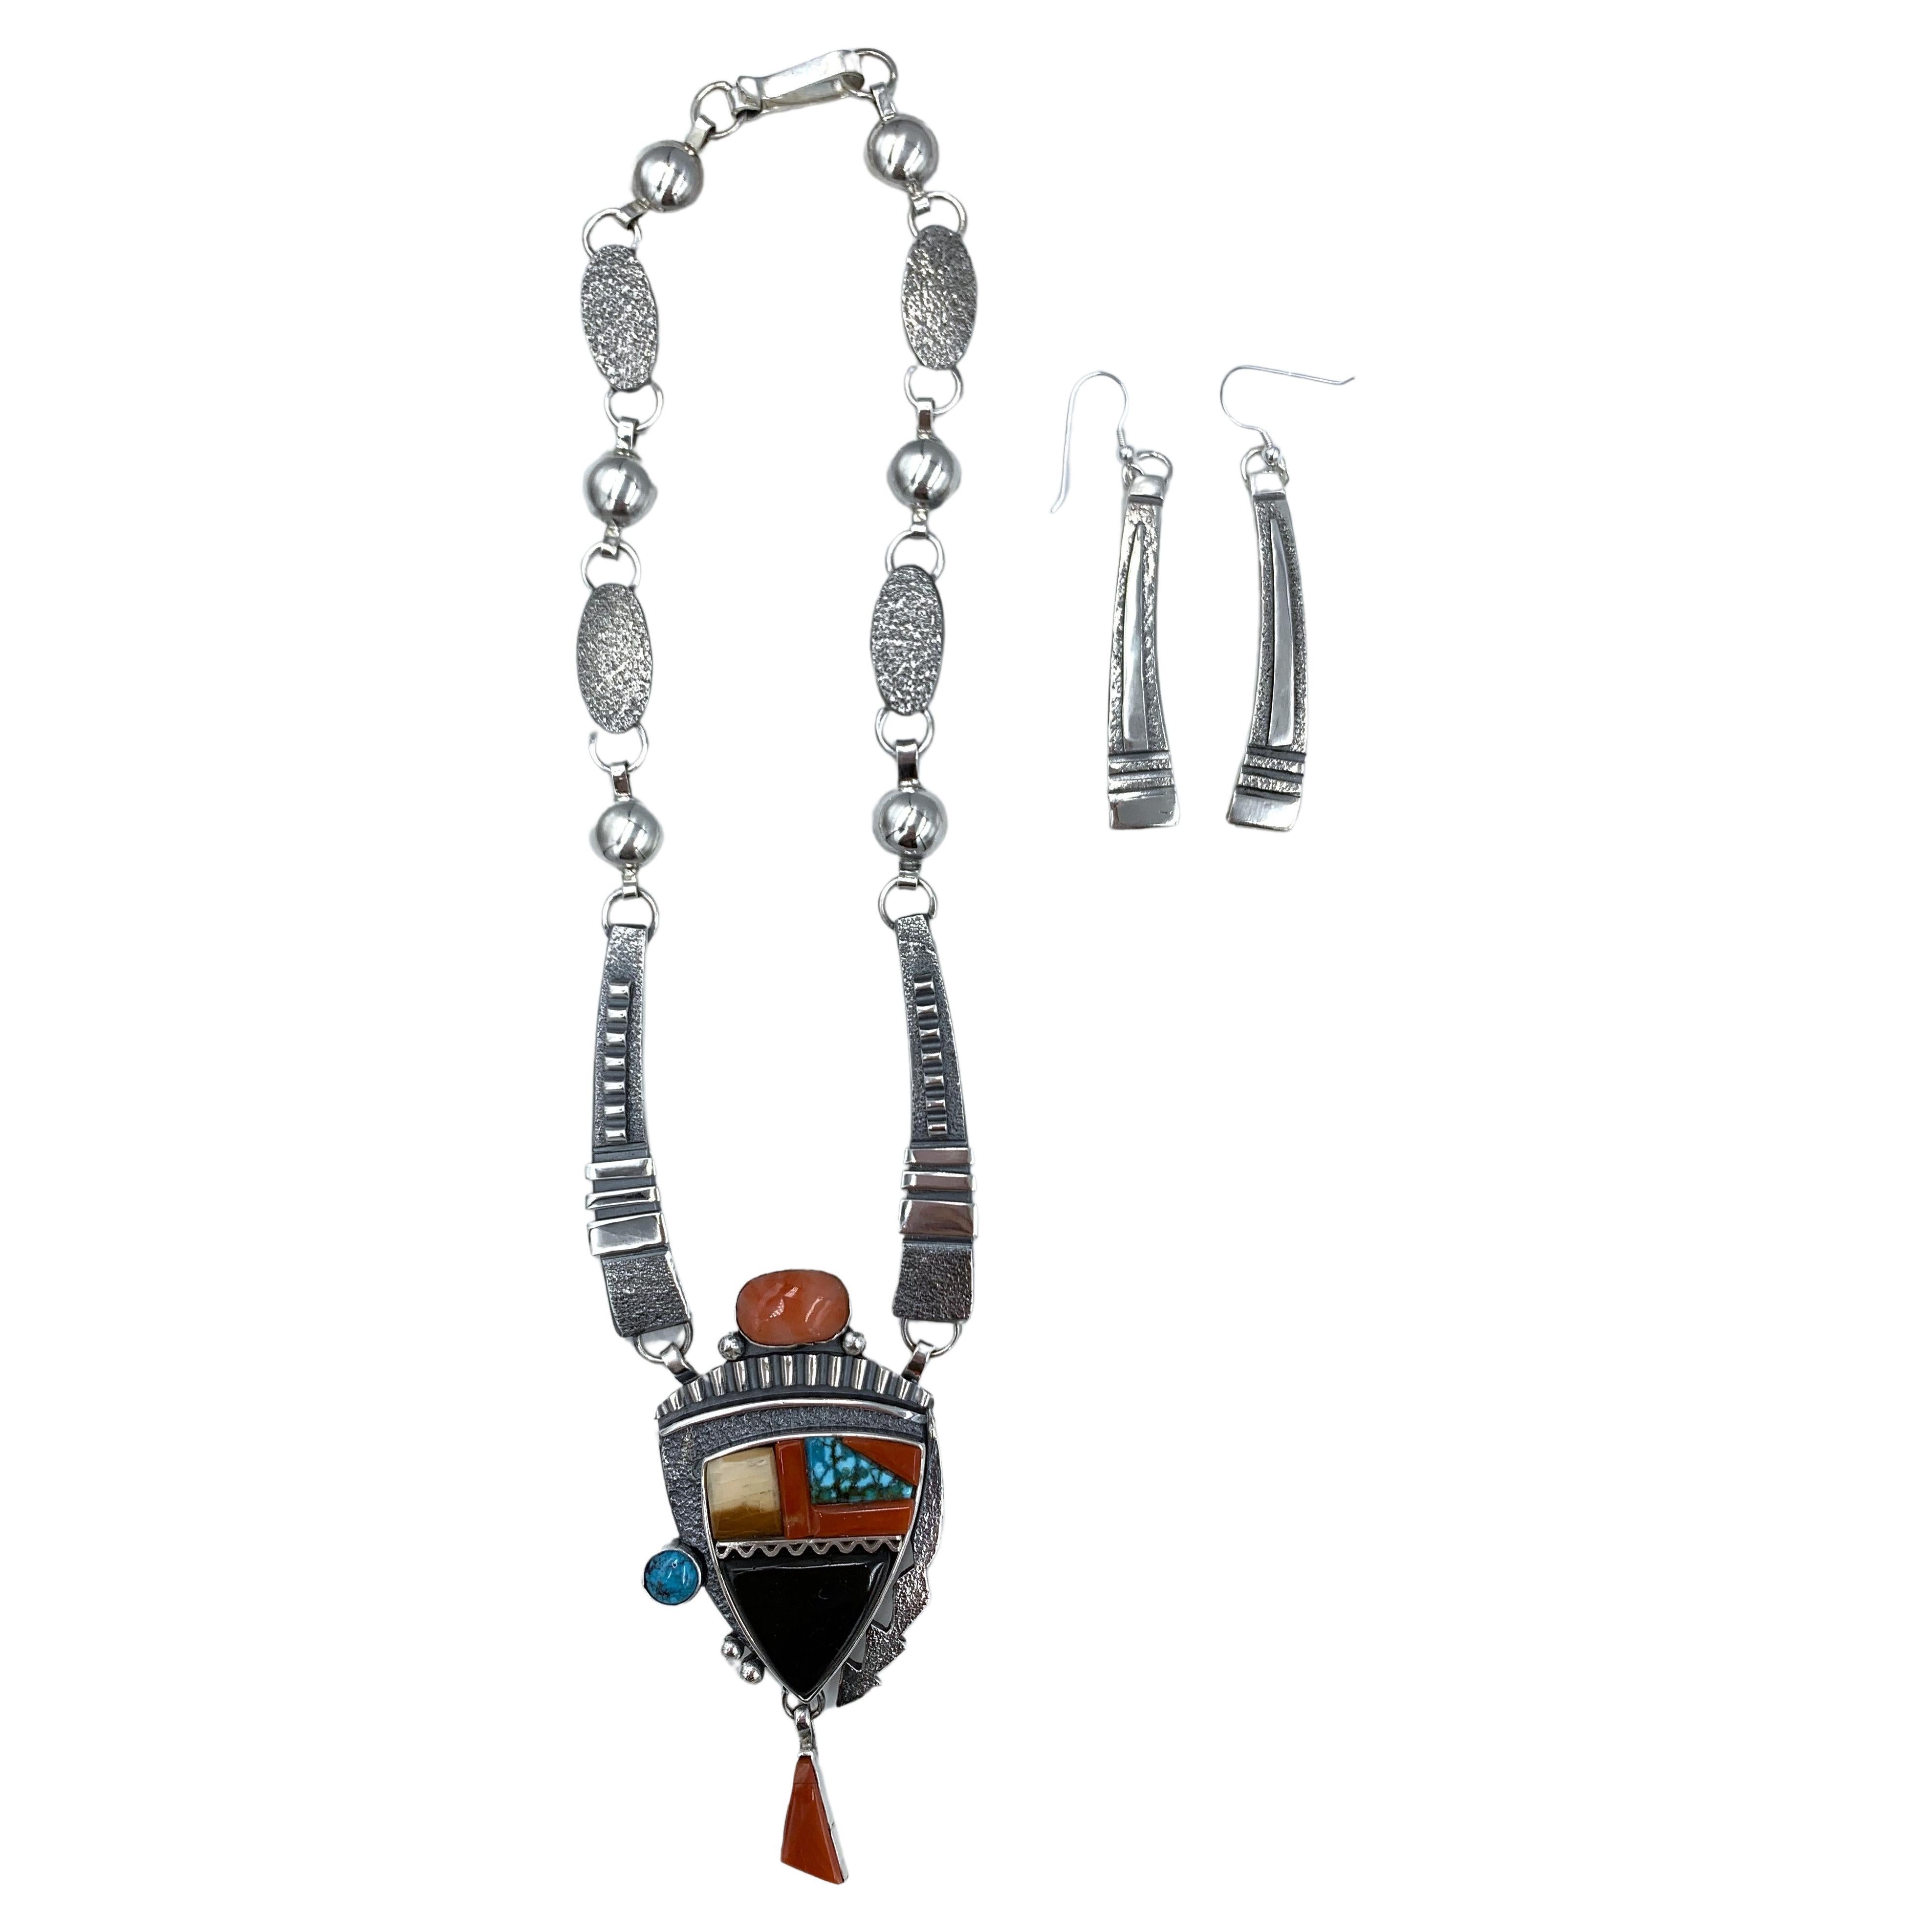 Sterling silver and inlay necklace and earrings set by Navajo silversmith Jack Tom. The pendant has turquoise, jet, jasper, coral, spiney oyster.

Tom's signature design is sleek and elegant with refined oxidized ridges against bright sterling